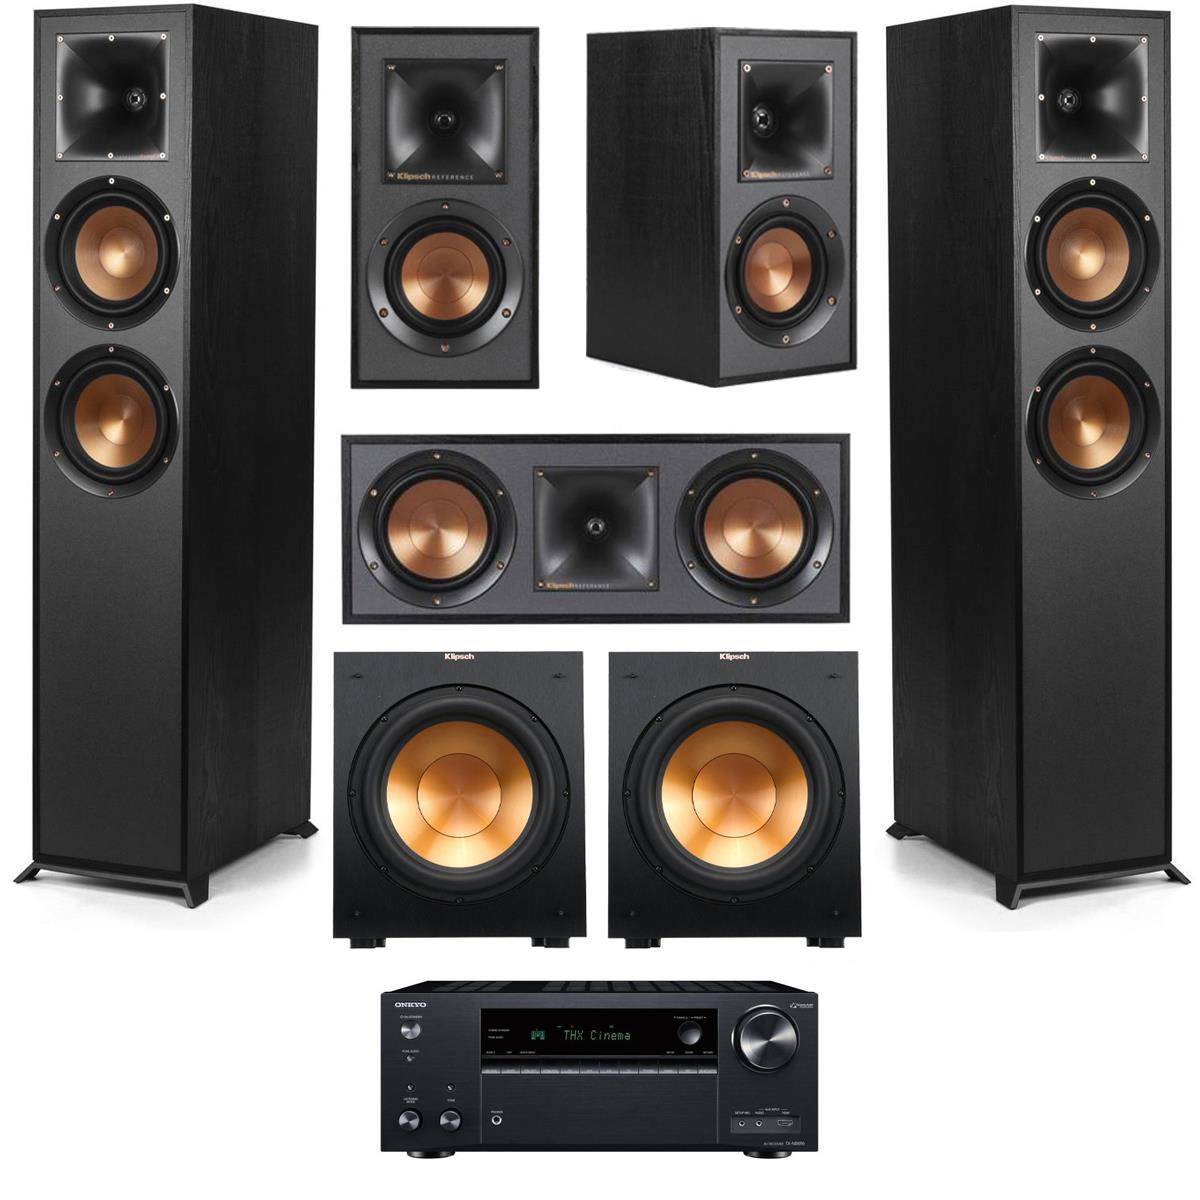 Klipsch Reference 5.2 Home Theater System, Black w/ Denon AVR-S970H 7.2 Receiver -  1065834 K6